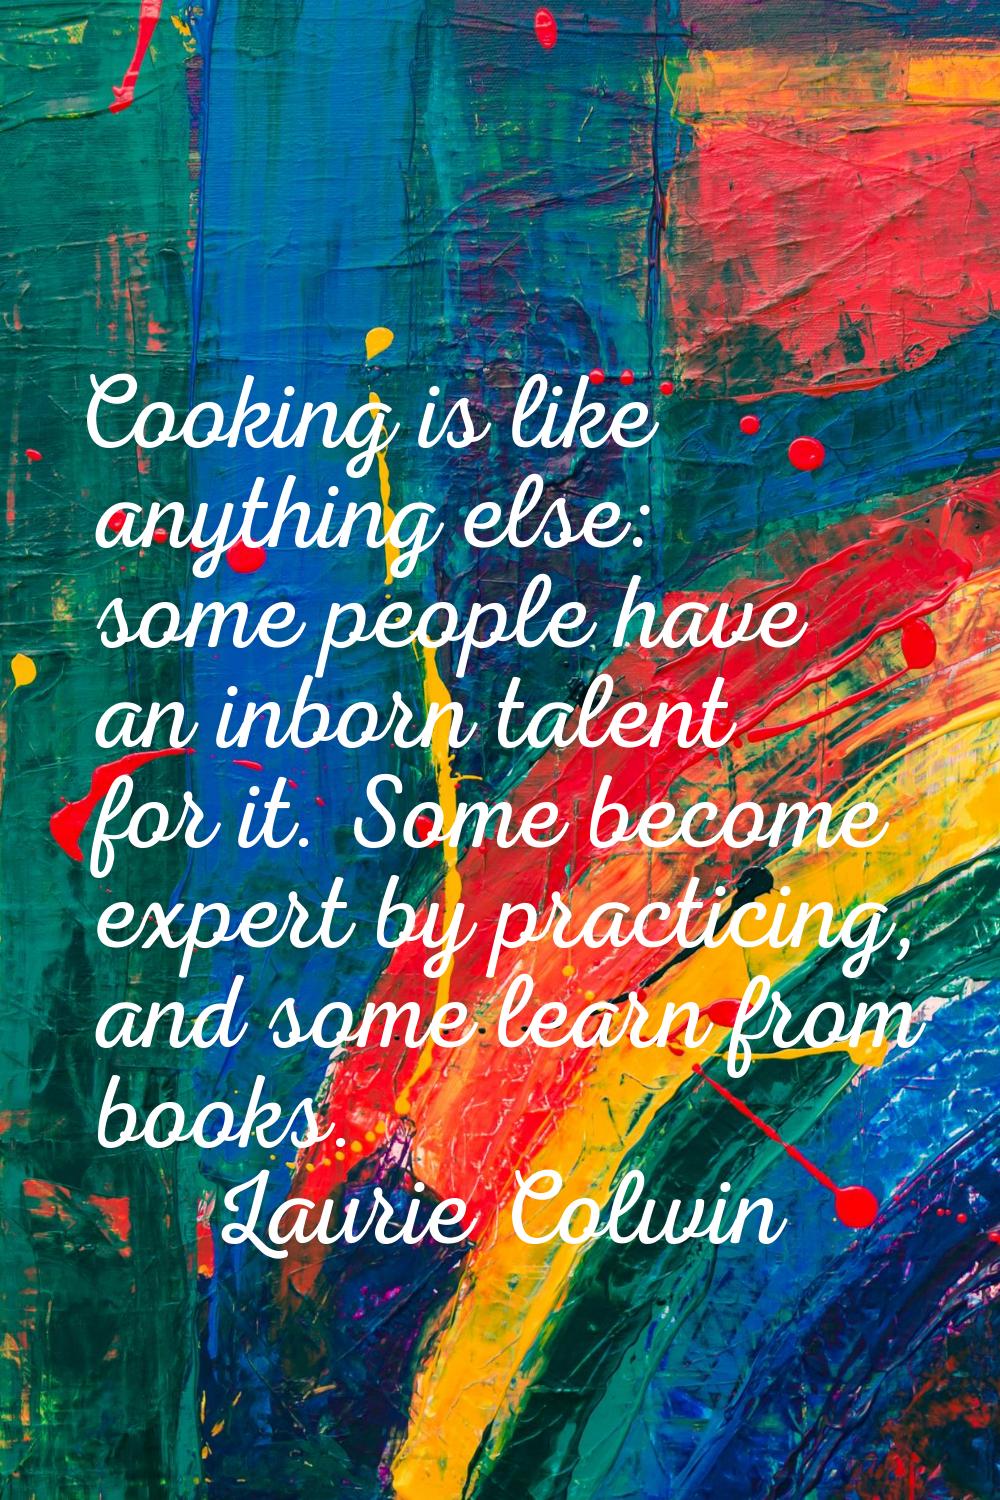 Cooking is like anything else: some people have an inborn talent for it. Some become expert by prac